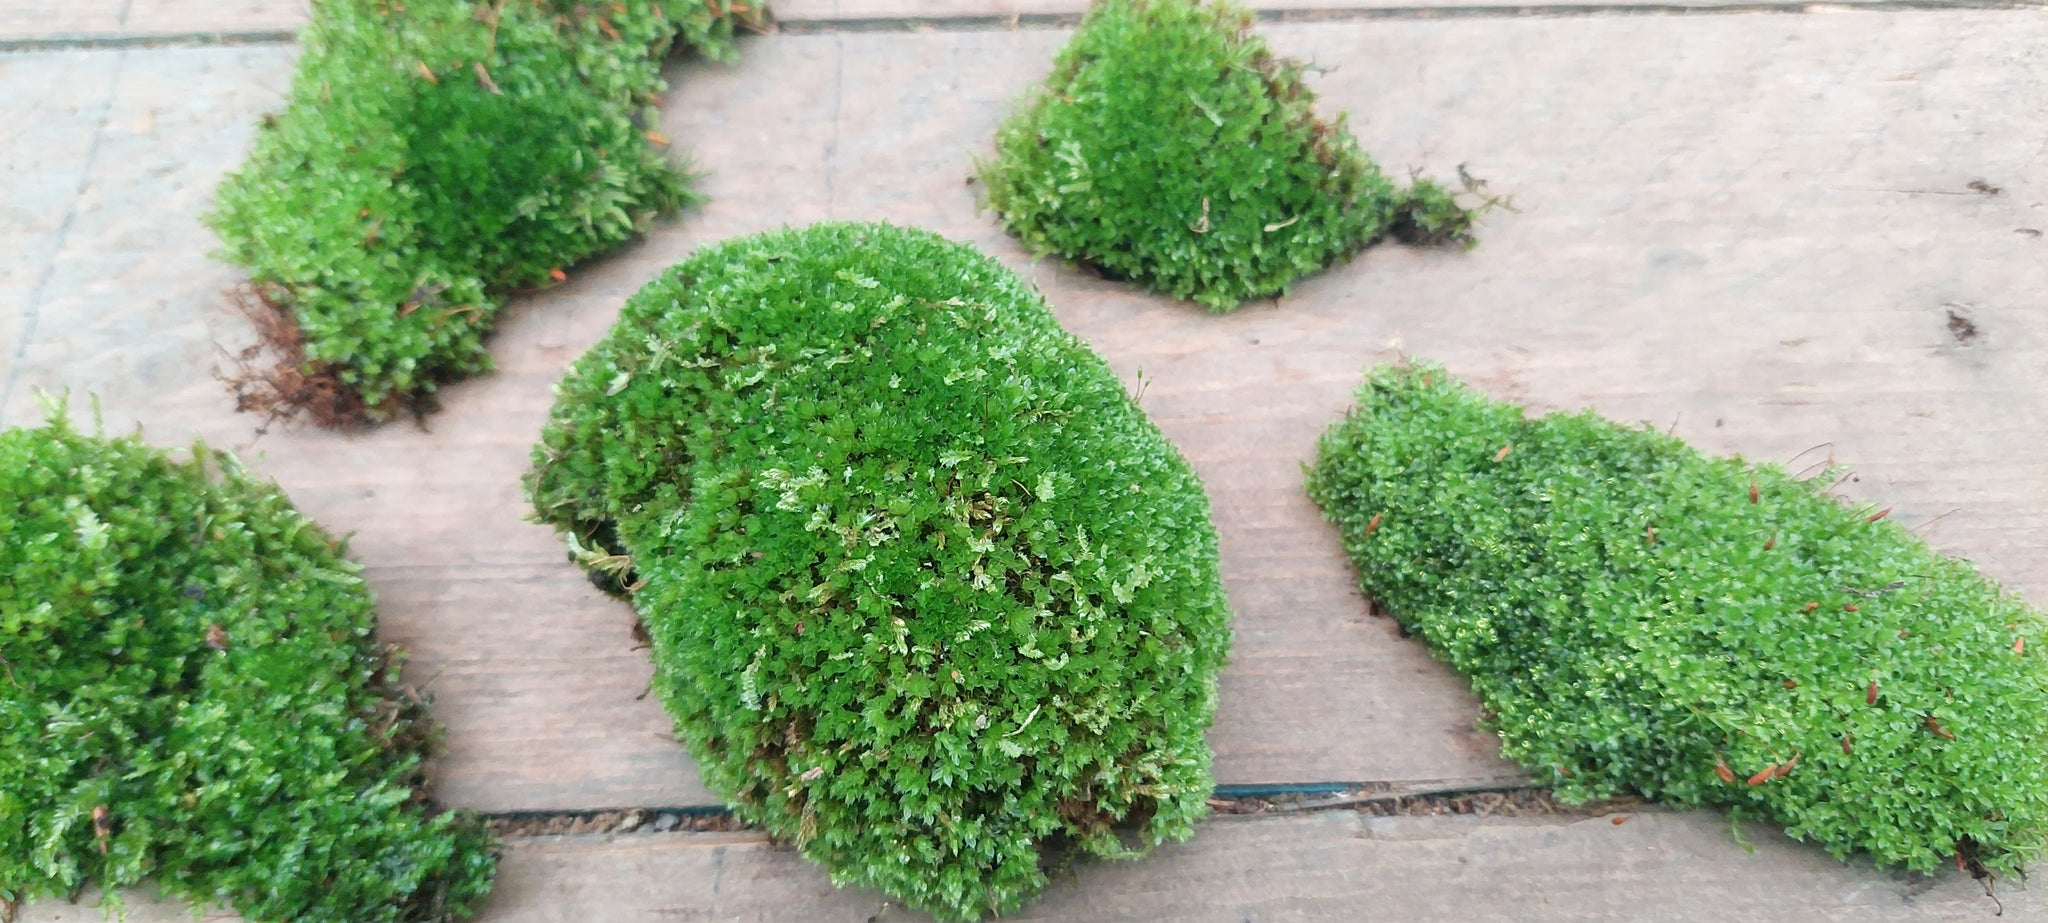 Buy Live Cushion Moss for Terrariums Online - UK Delivery